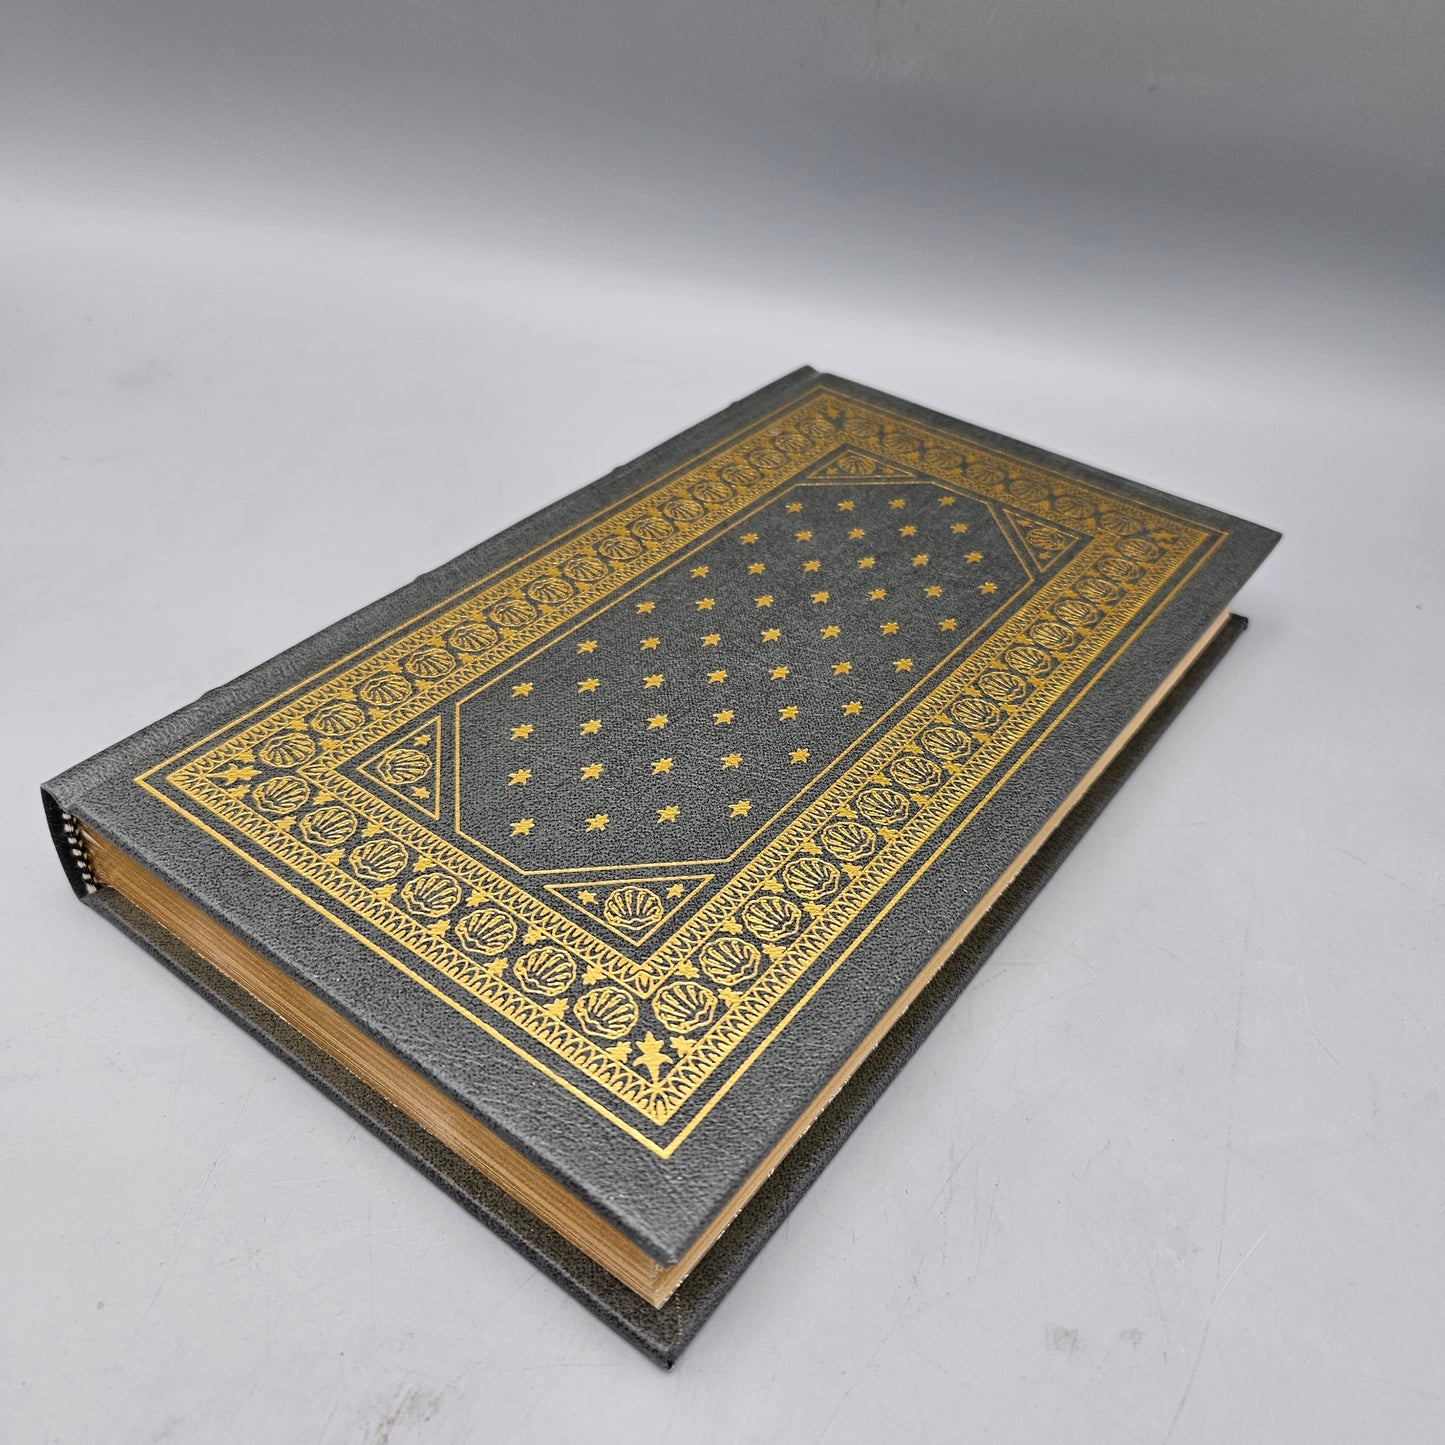 Leatherbound Book - The Aeneid of Virgil Franklin Library